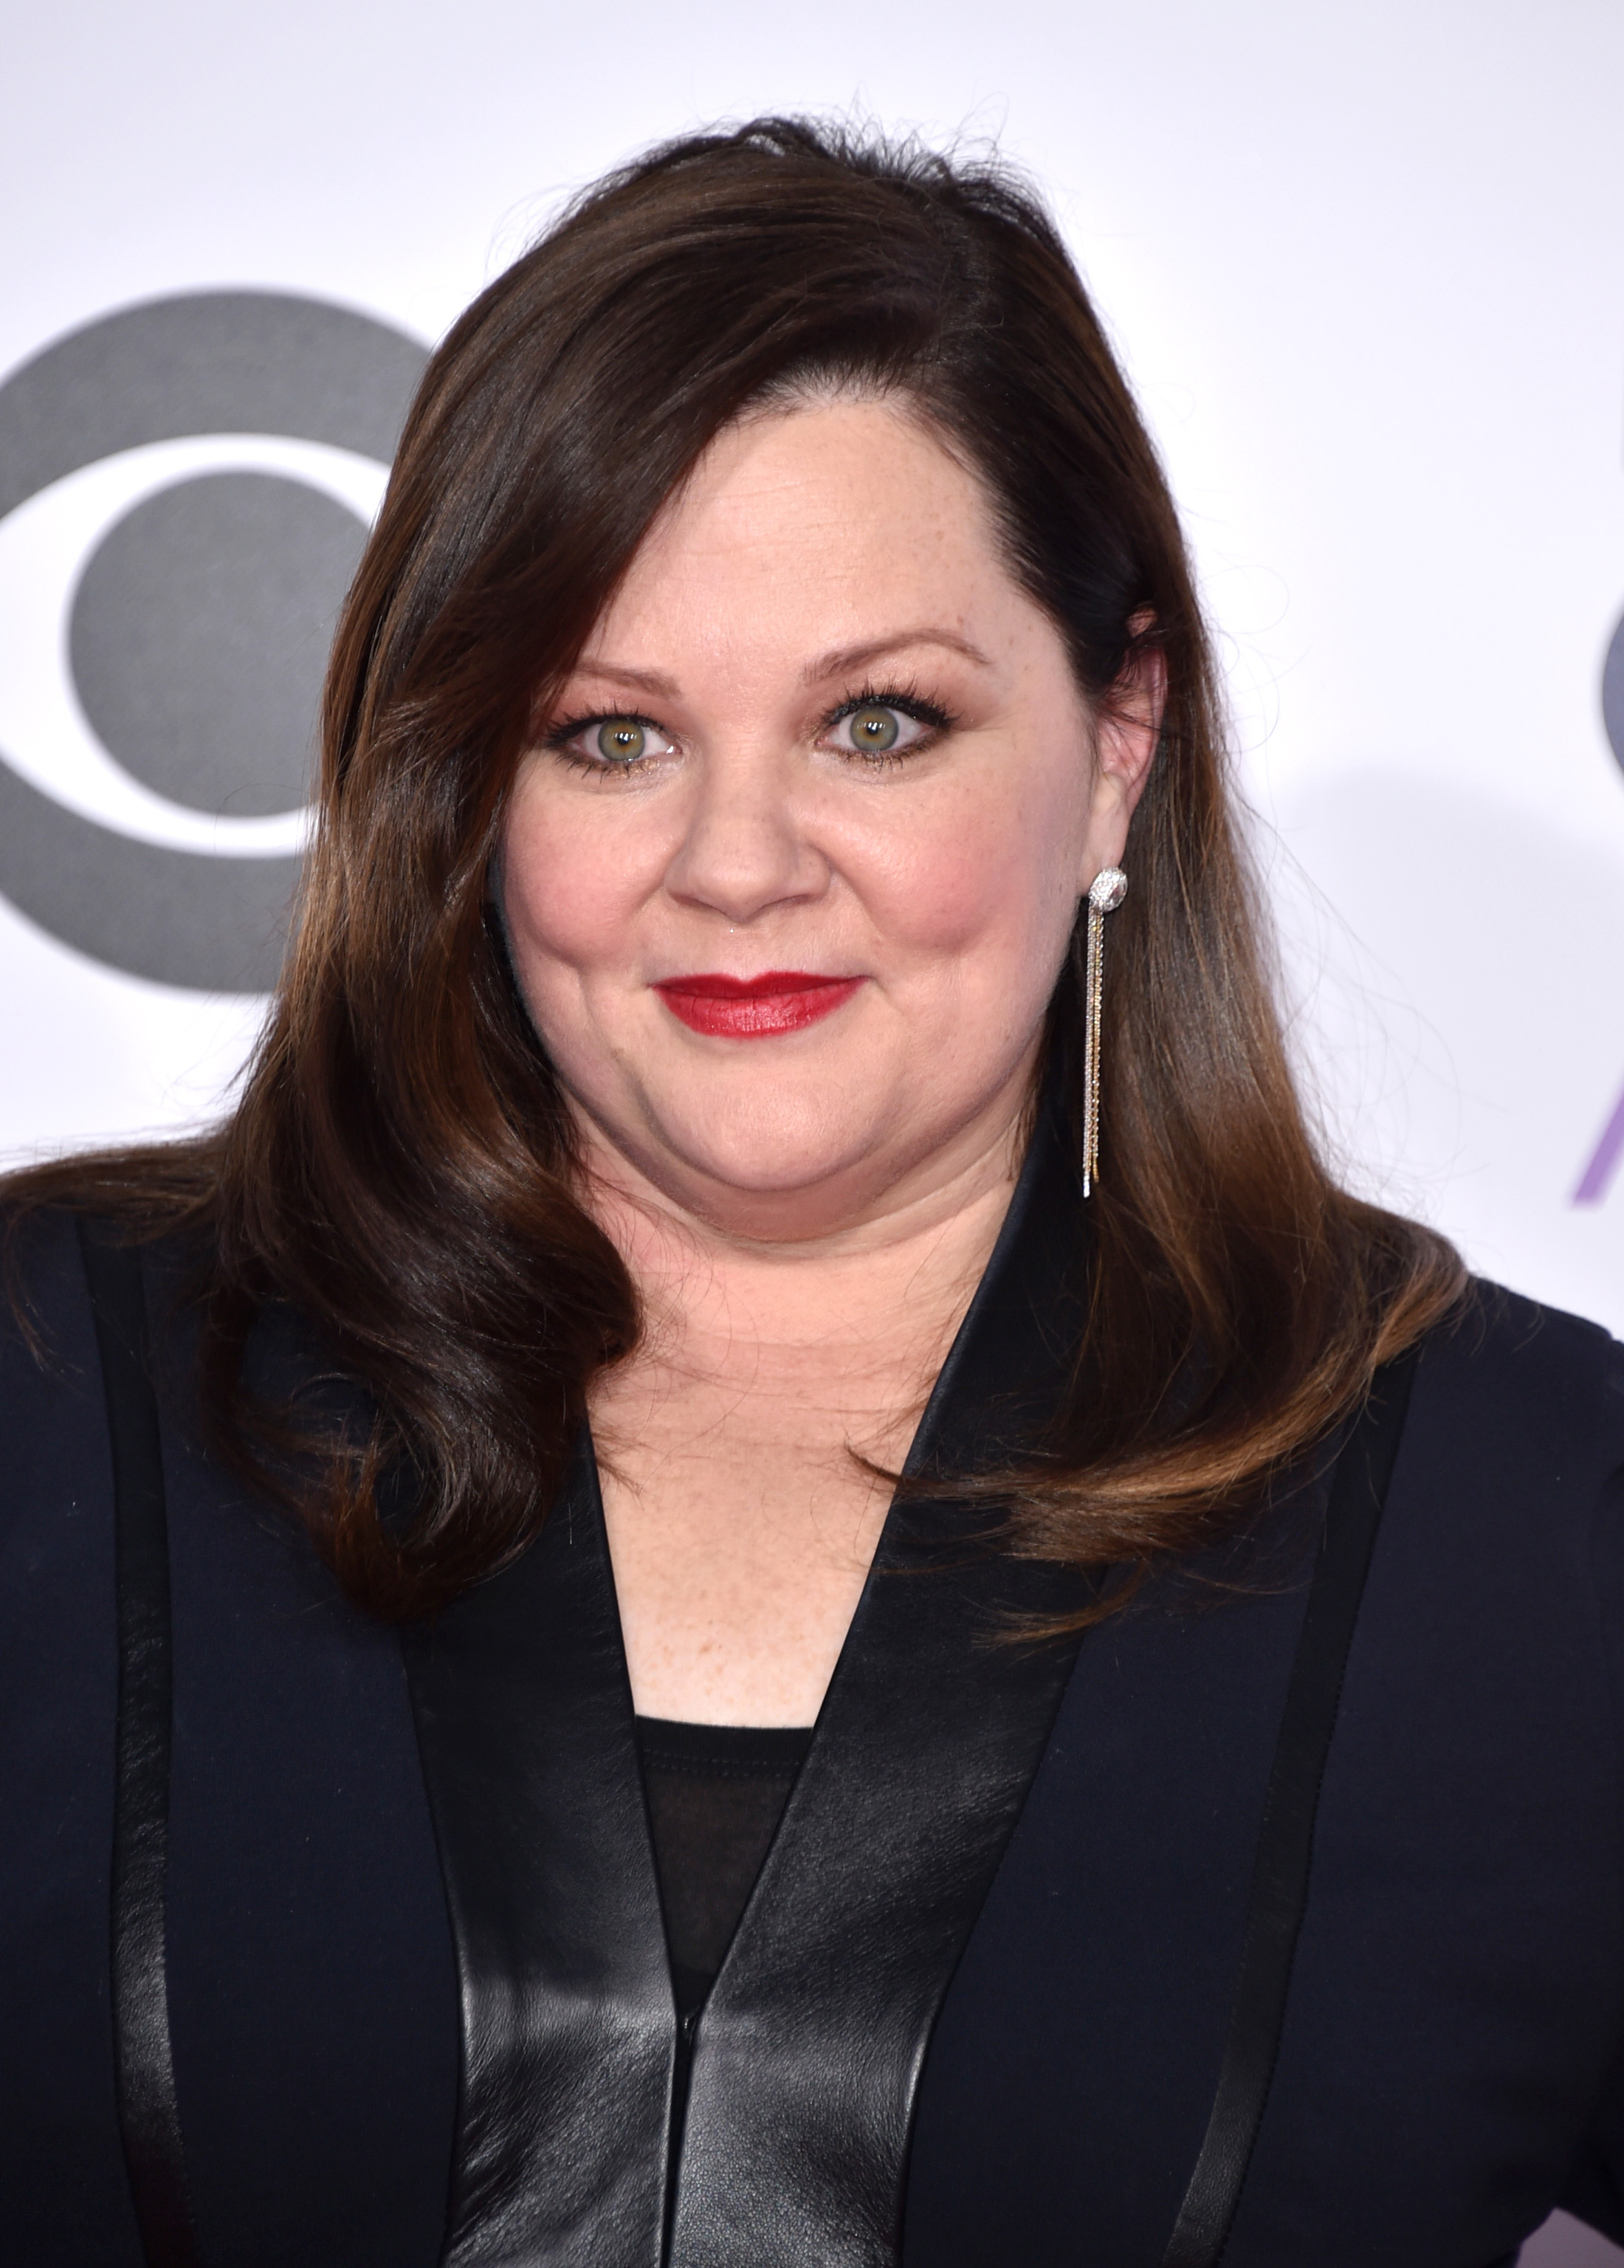 Melissa McCarthy arrives at the People's Choice Awards at the Nokia Theatre on Jan. 7, 2015, in Los Angeles.